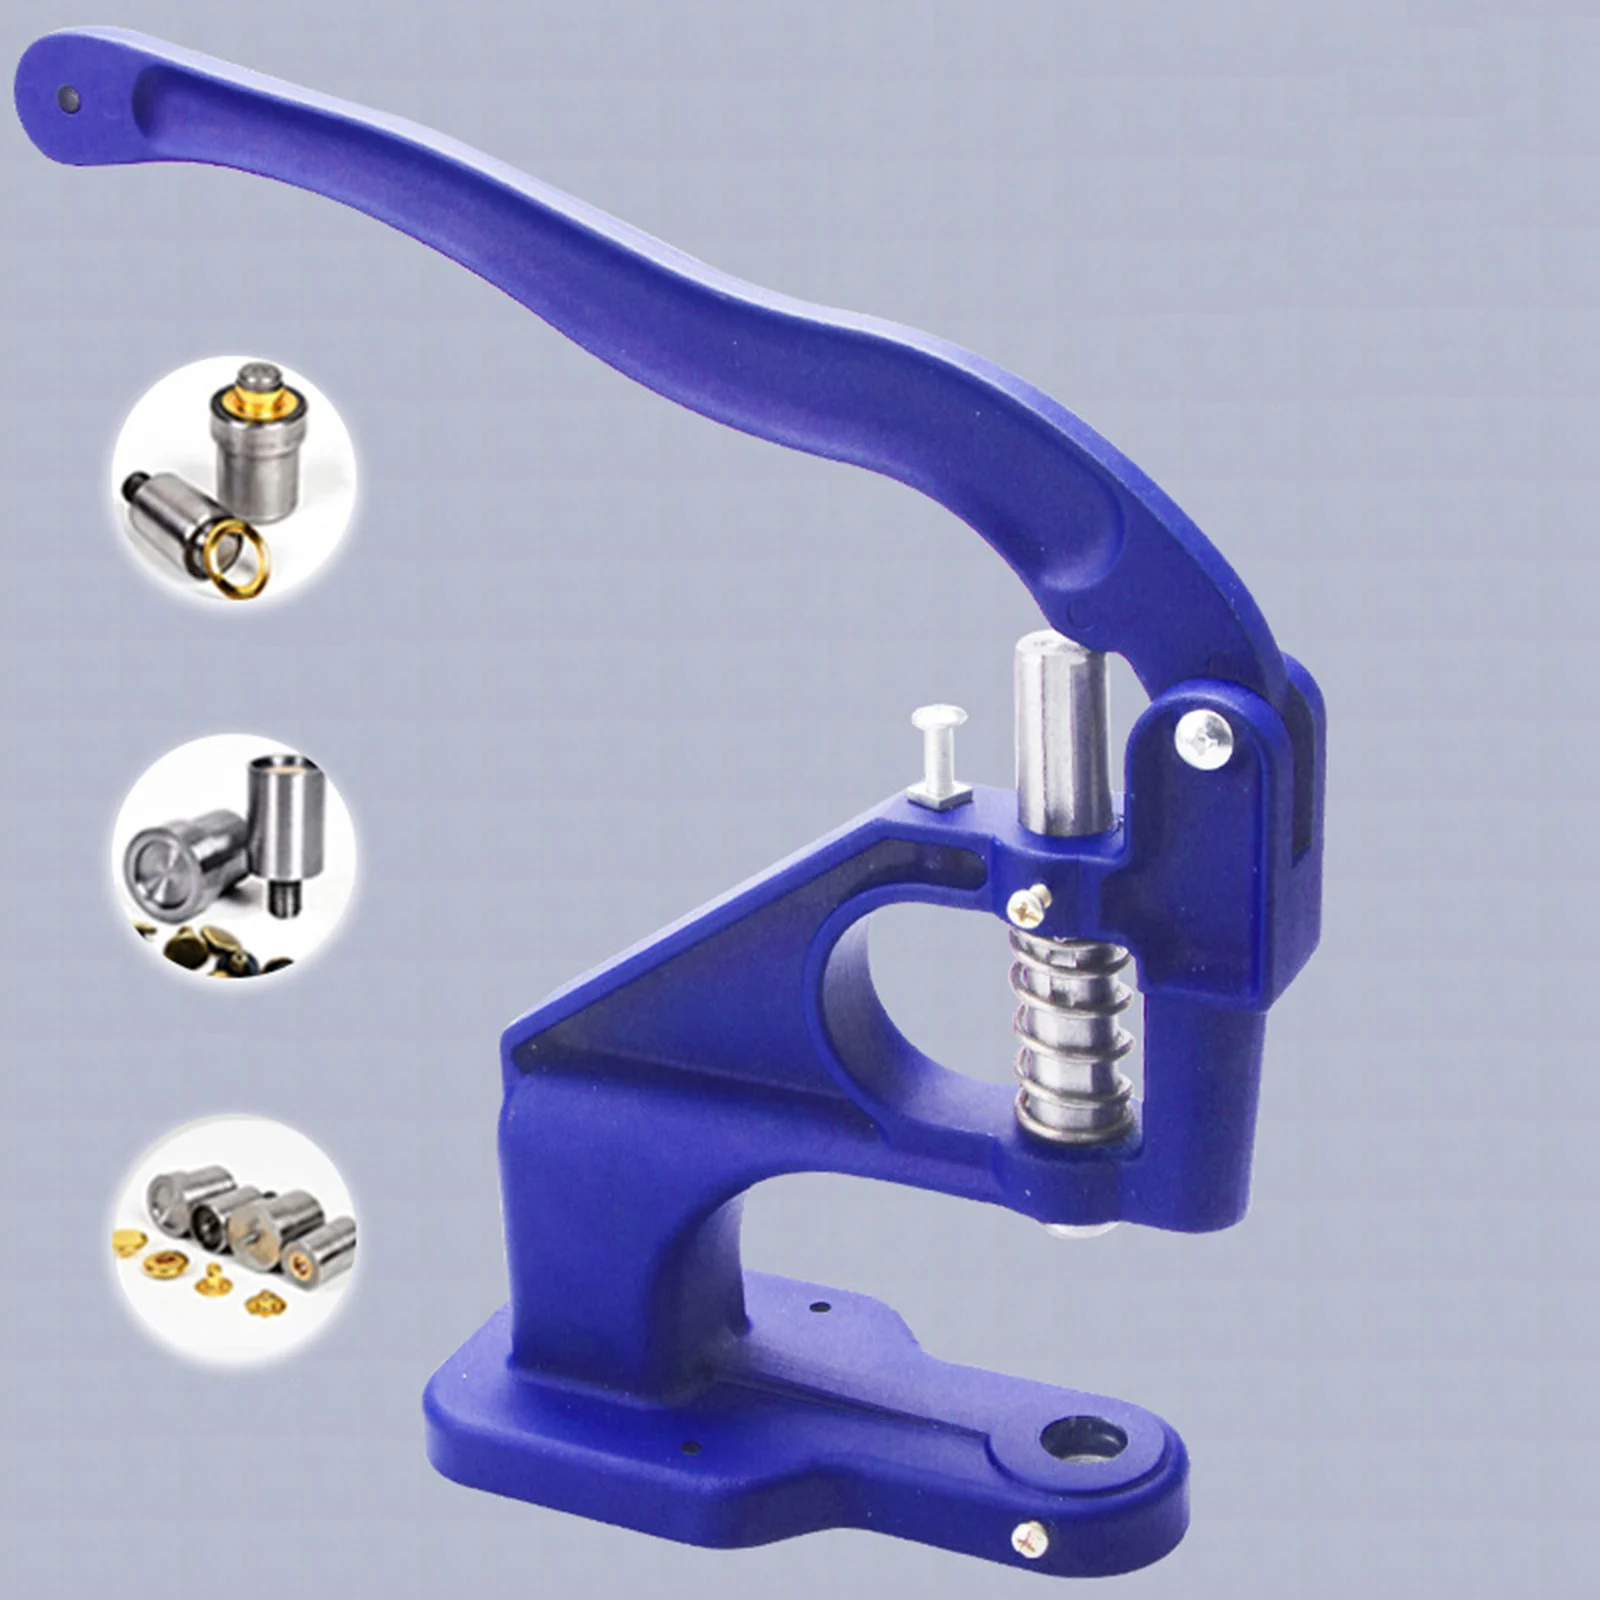 Portable Grommet Eyelet Hole Punch Tool Pressing Machine Hand Sanp Button Press Tool for Rivets Fastener Sewing